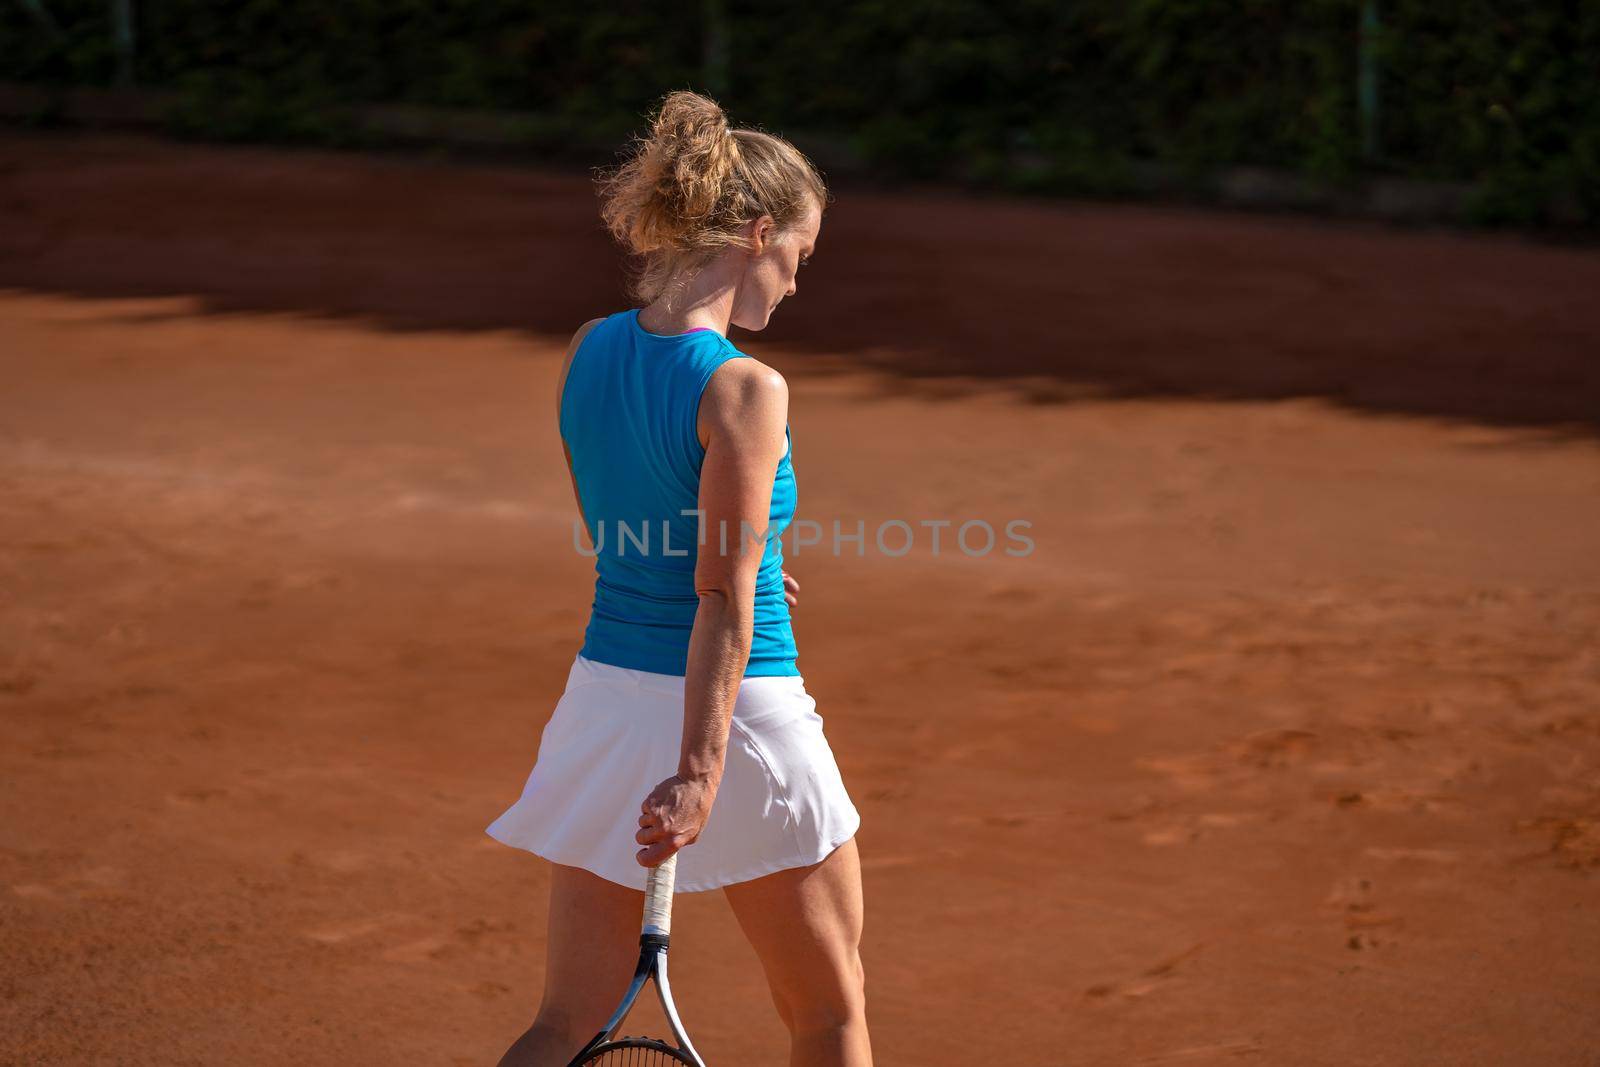 female tennis player on an outdoor clay court by Edophoto